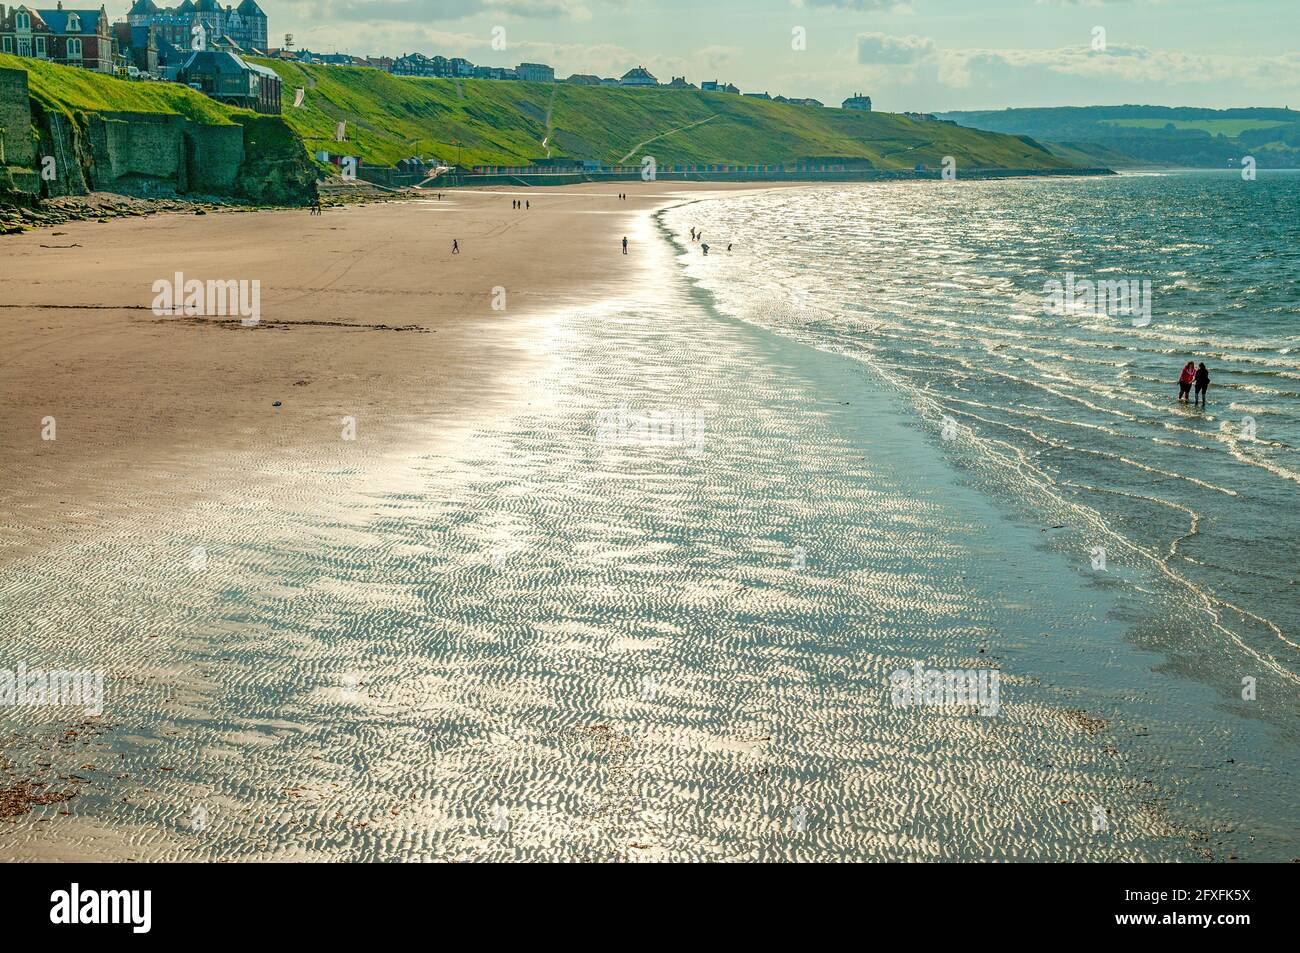 Beach at Whitby, Yorkshire, England Stock Photo